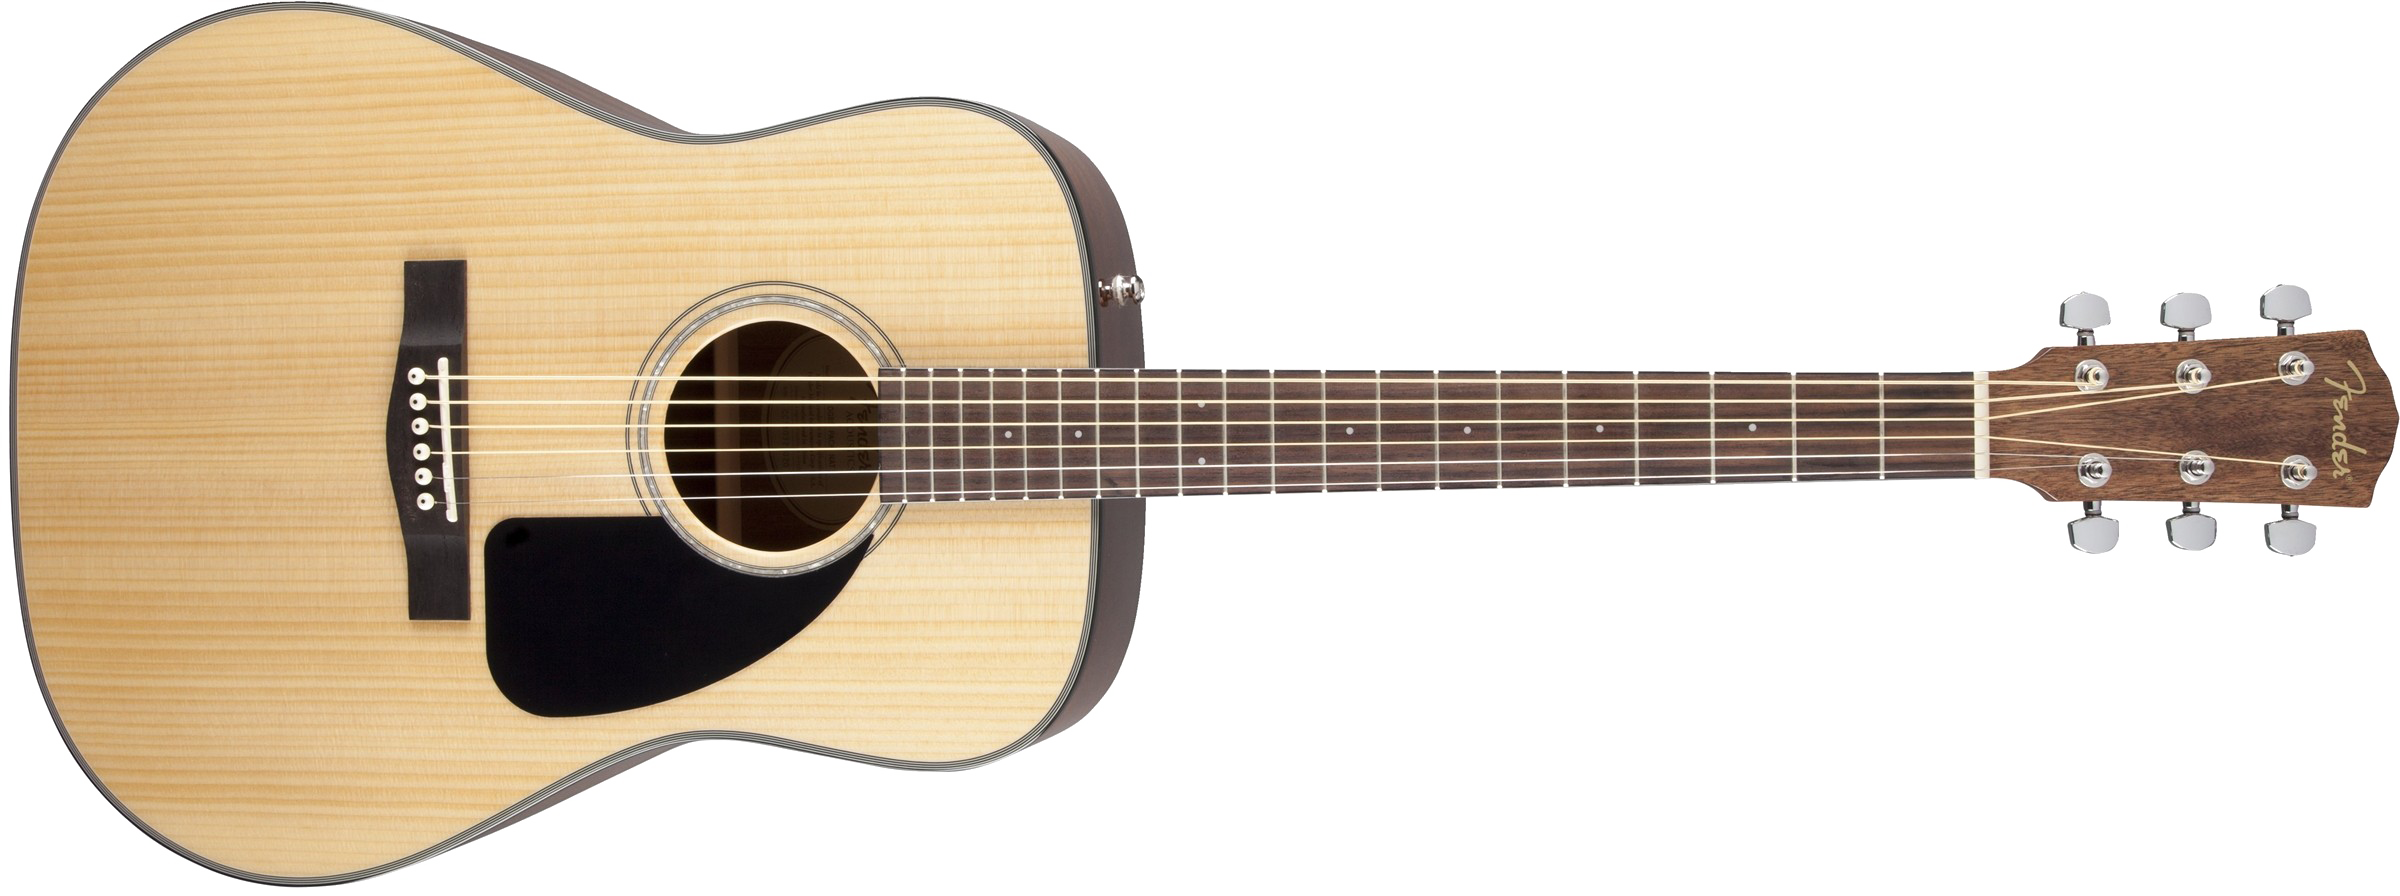 Download PNG image - Wooden Acoustic Guitar PNG 